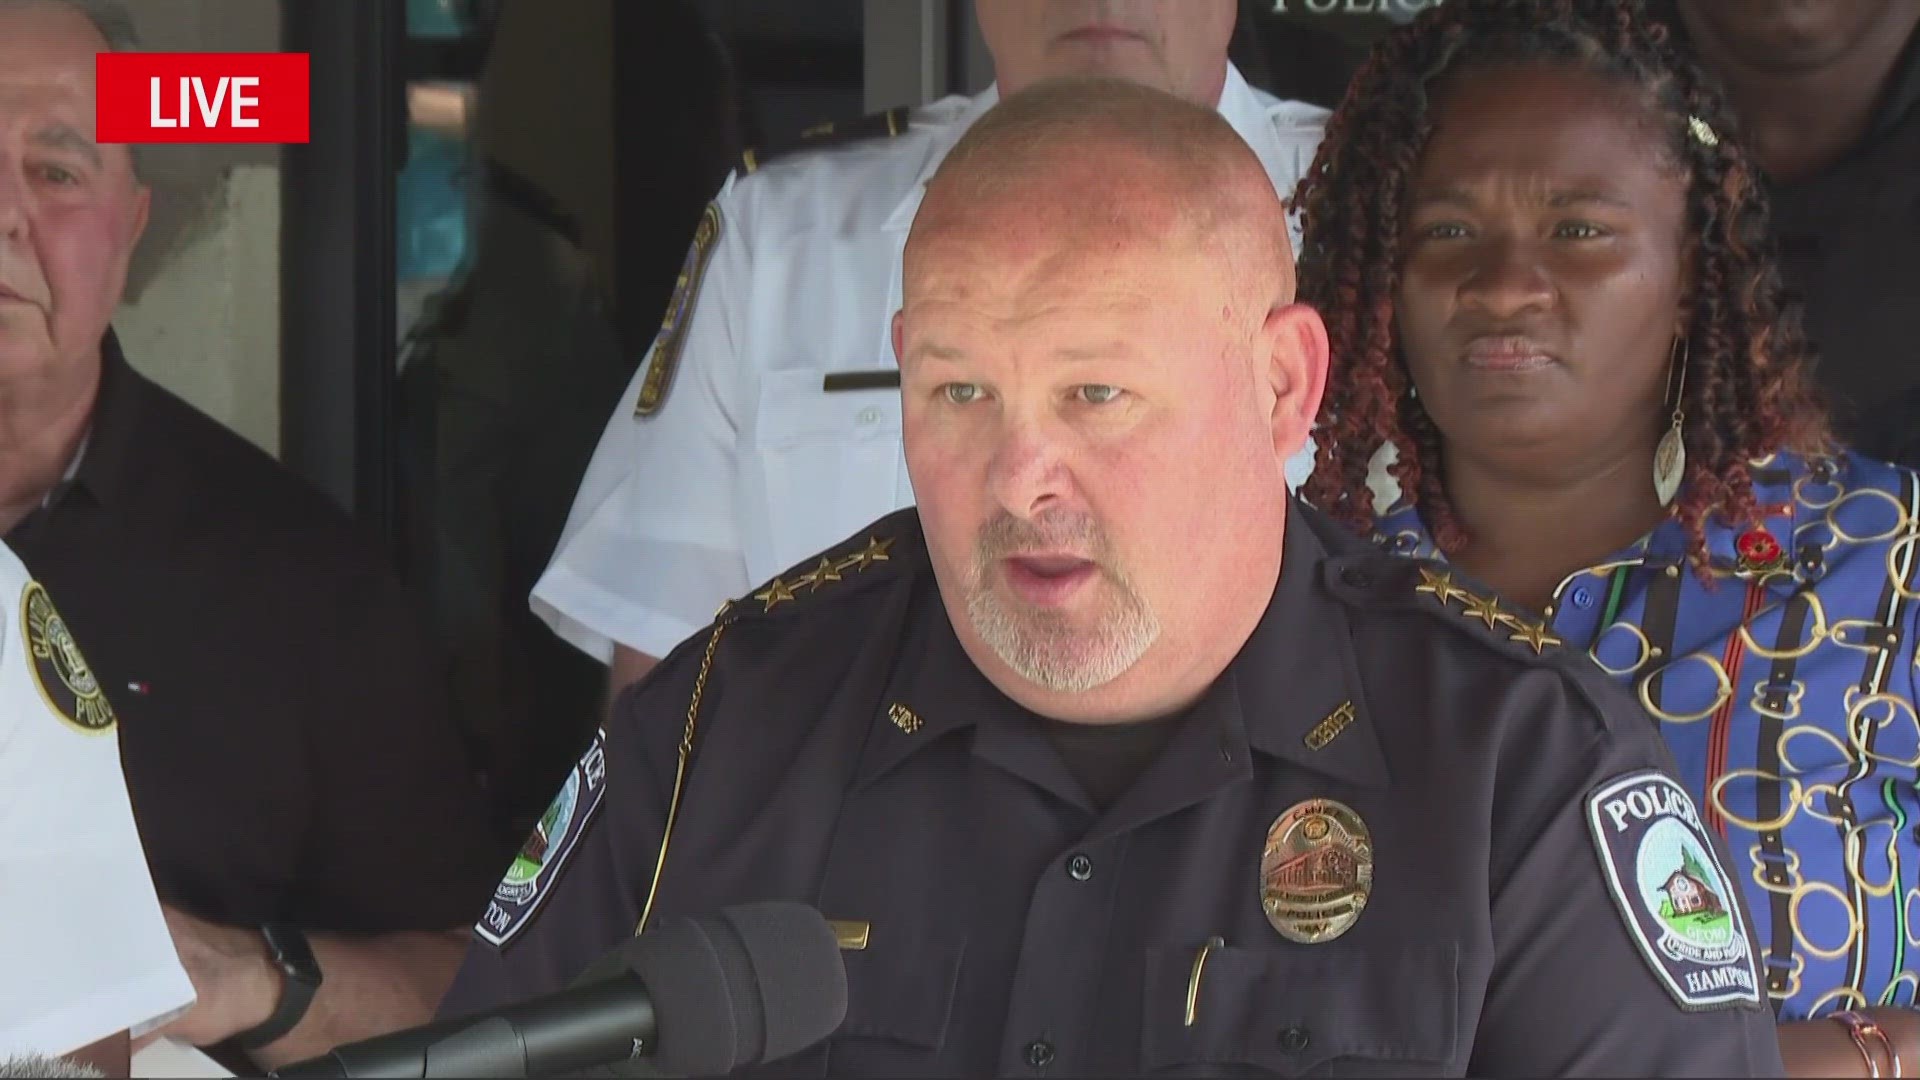 The Hampton police chief identified the victims as residents of Hampton, Georgia.